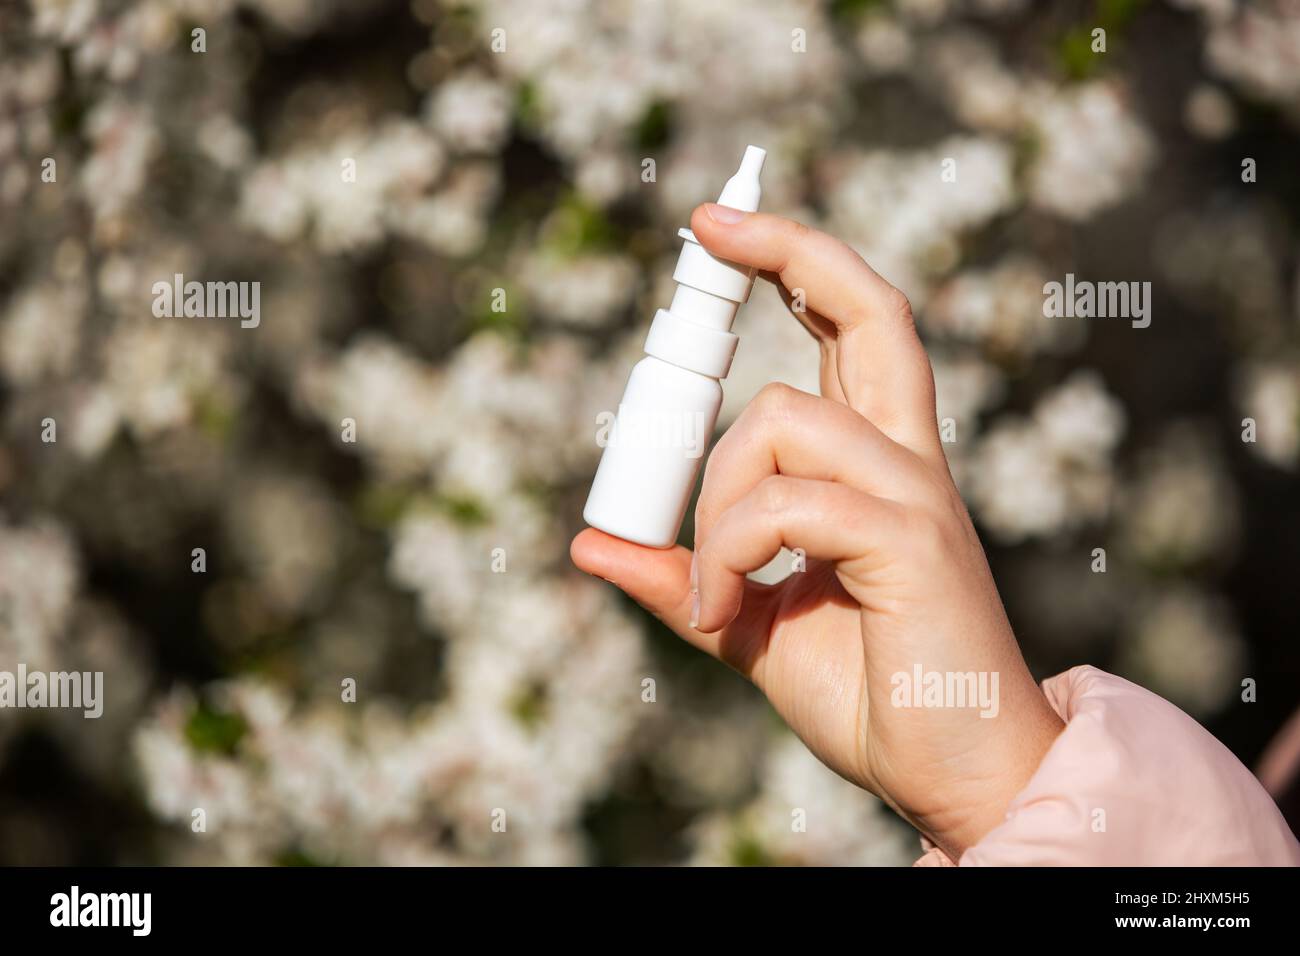 Allergy concept, young woman with nose or nasal spray in hand in front of blooming a tree during spring season, healthcare Stock Photo